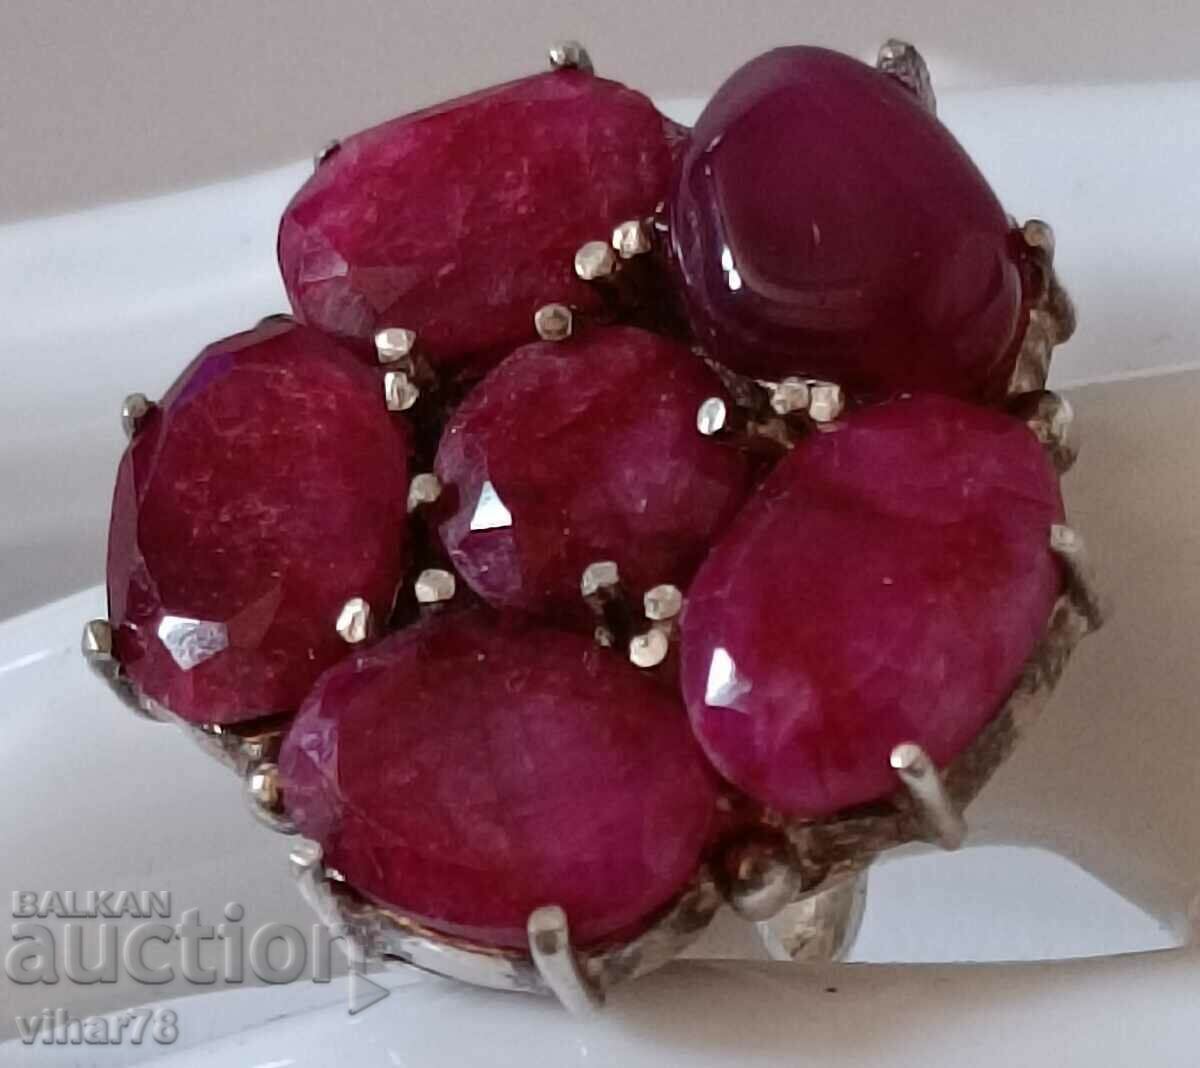 Silver Ring with rubies